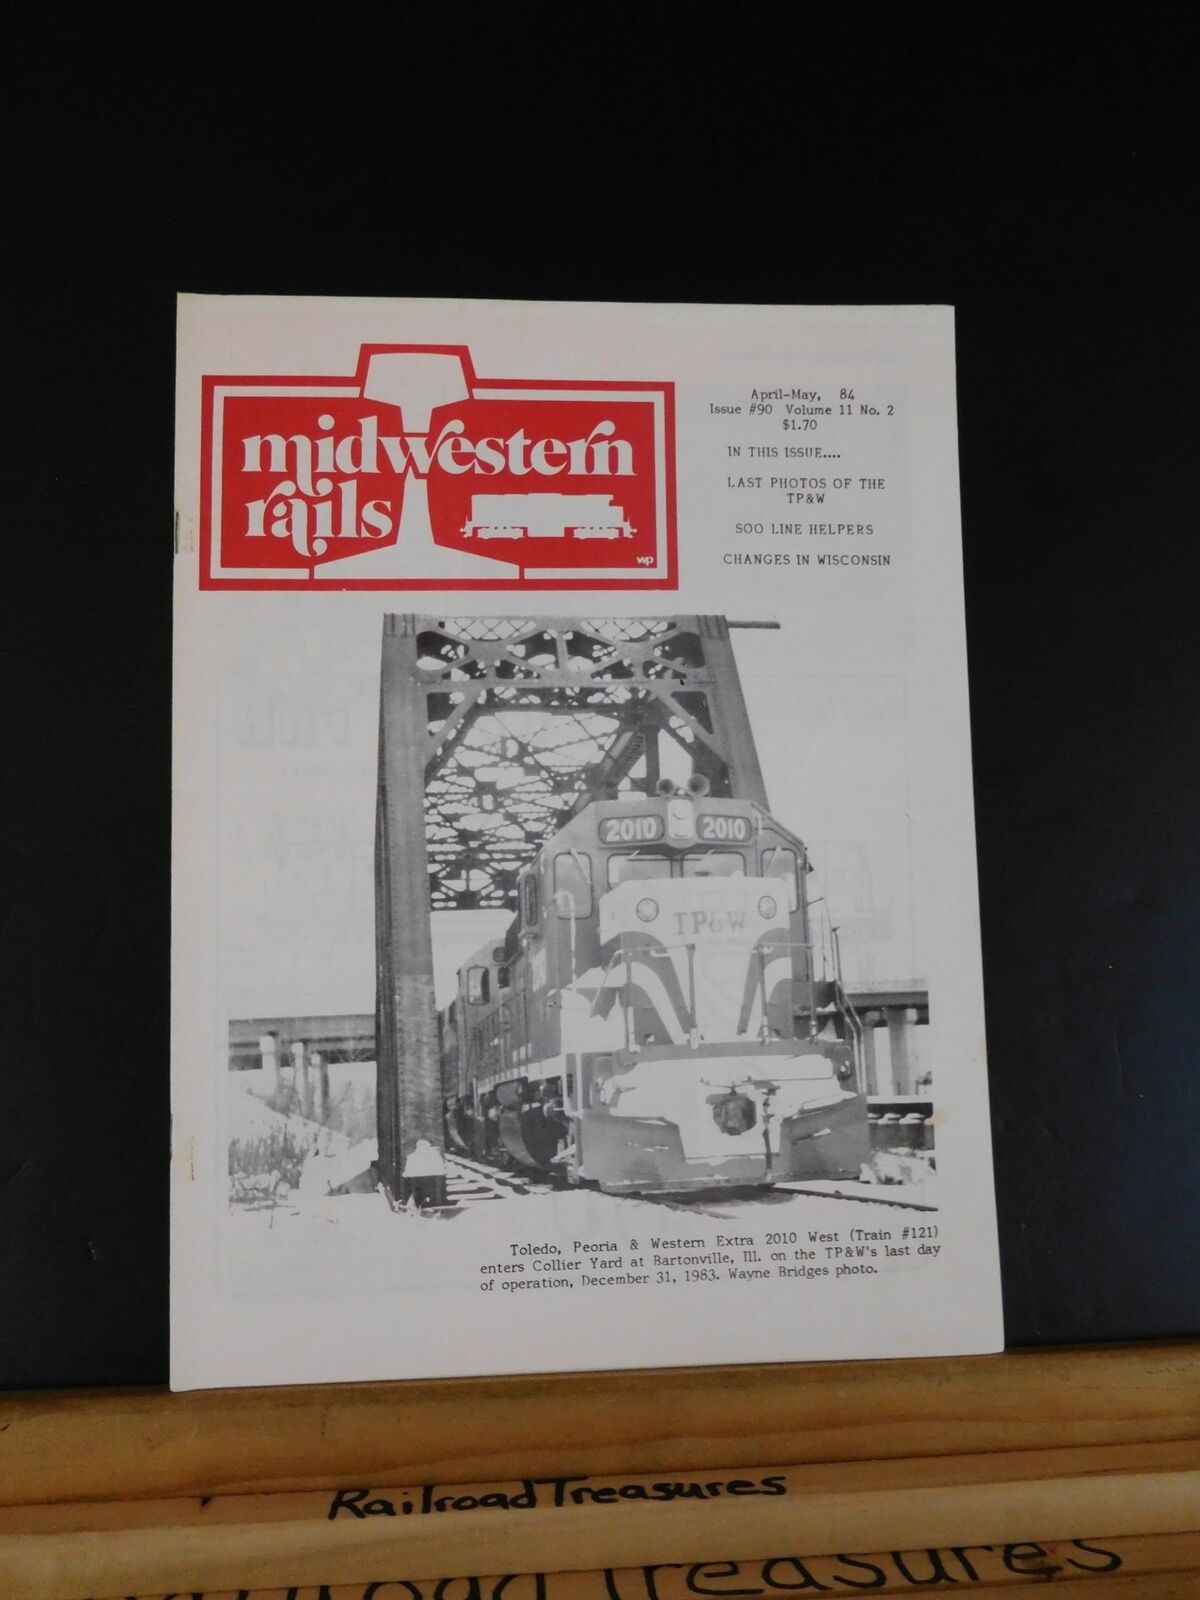 Midwestern Rails 1984 April-May Vol.11 No.2 Issue 84 Soo line helpers TP&W Photo